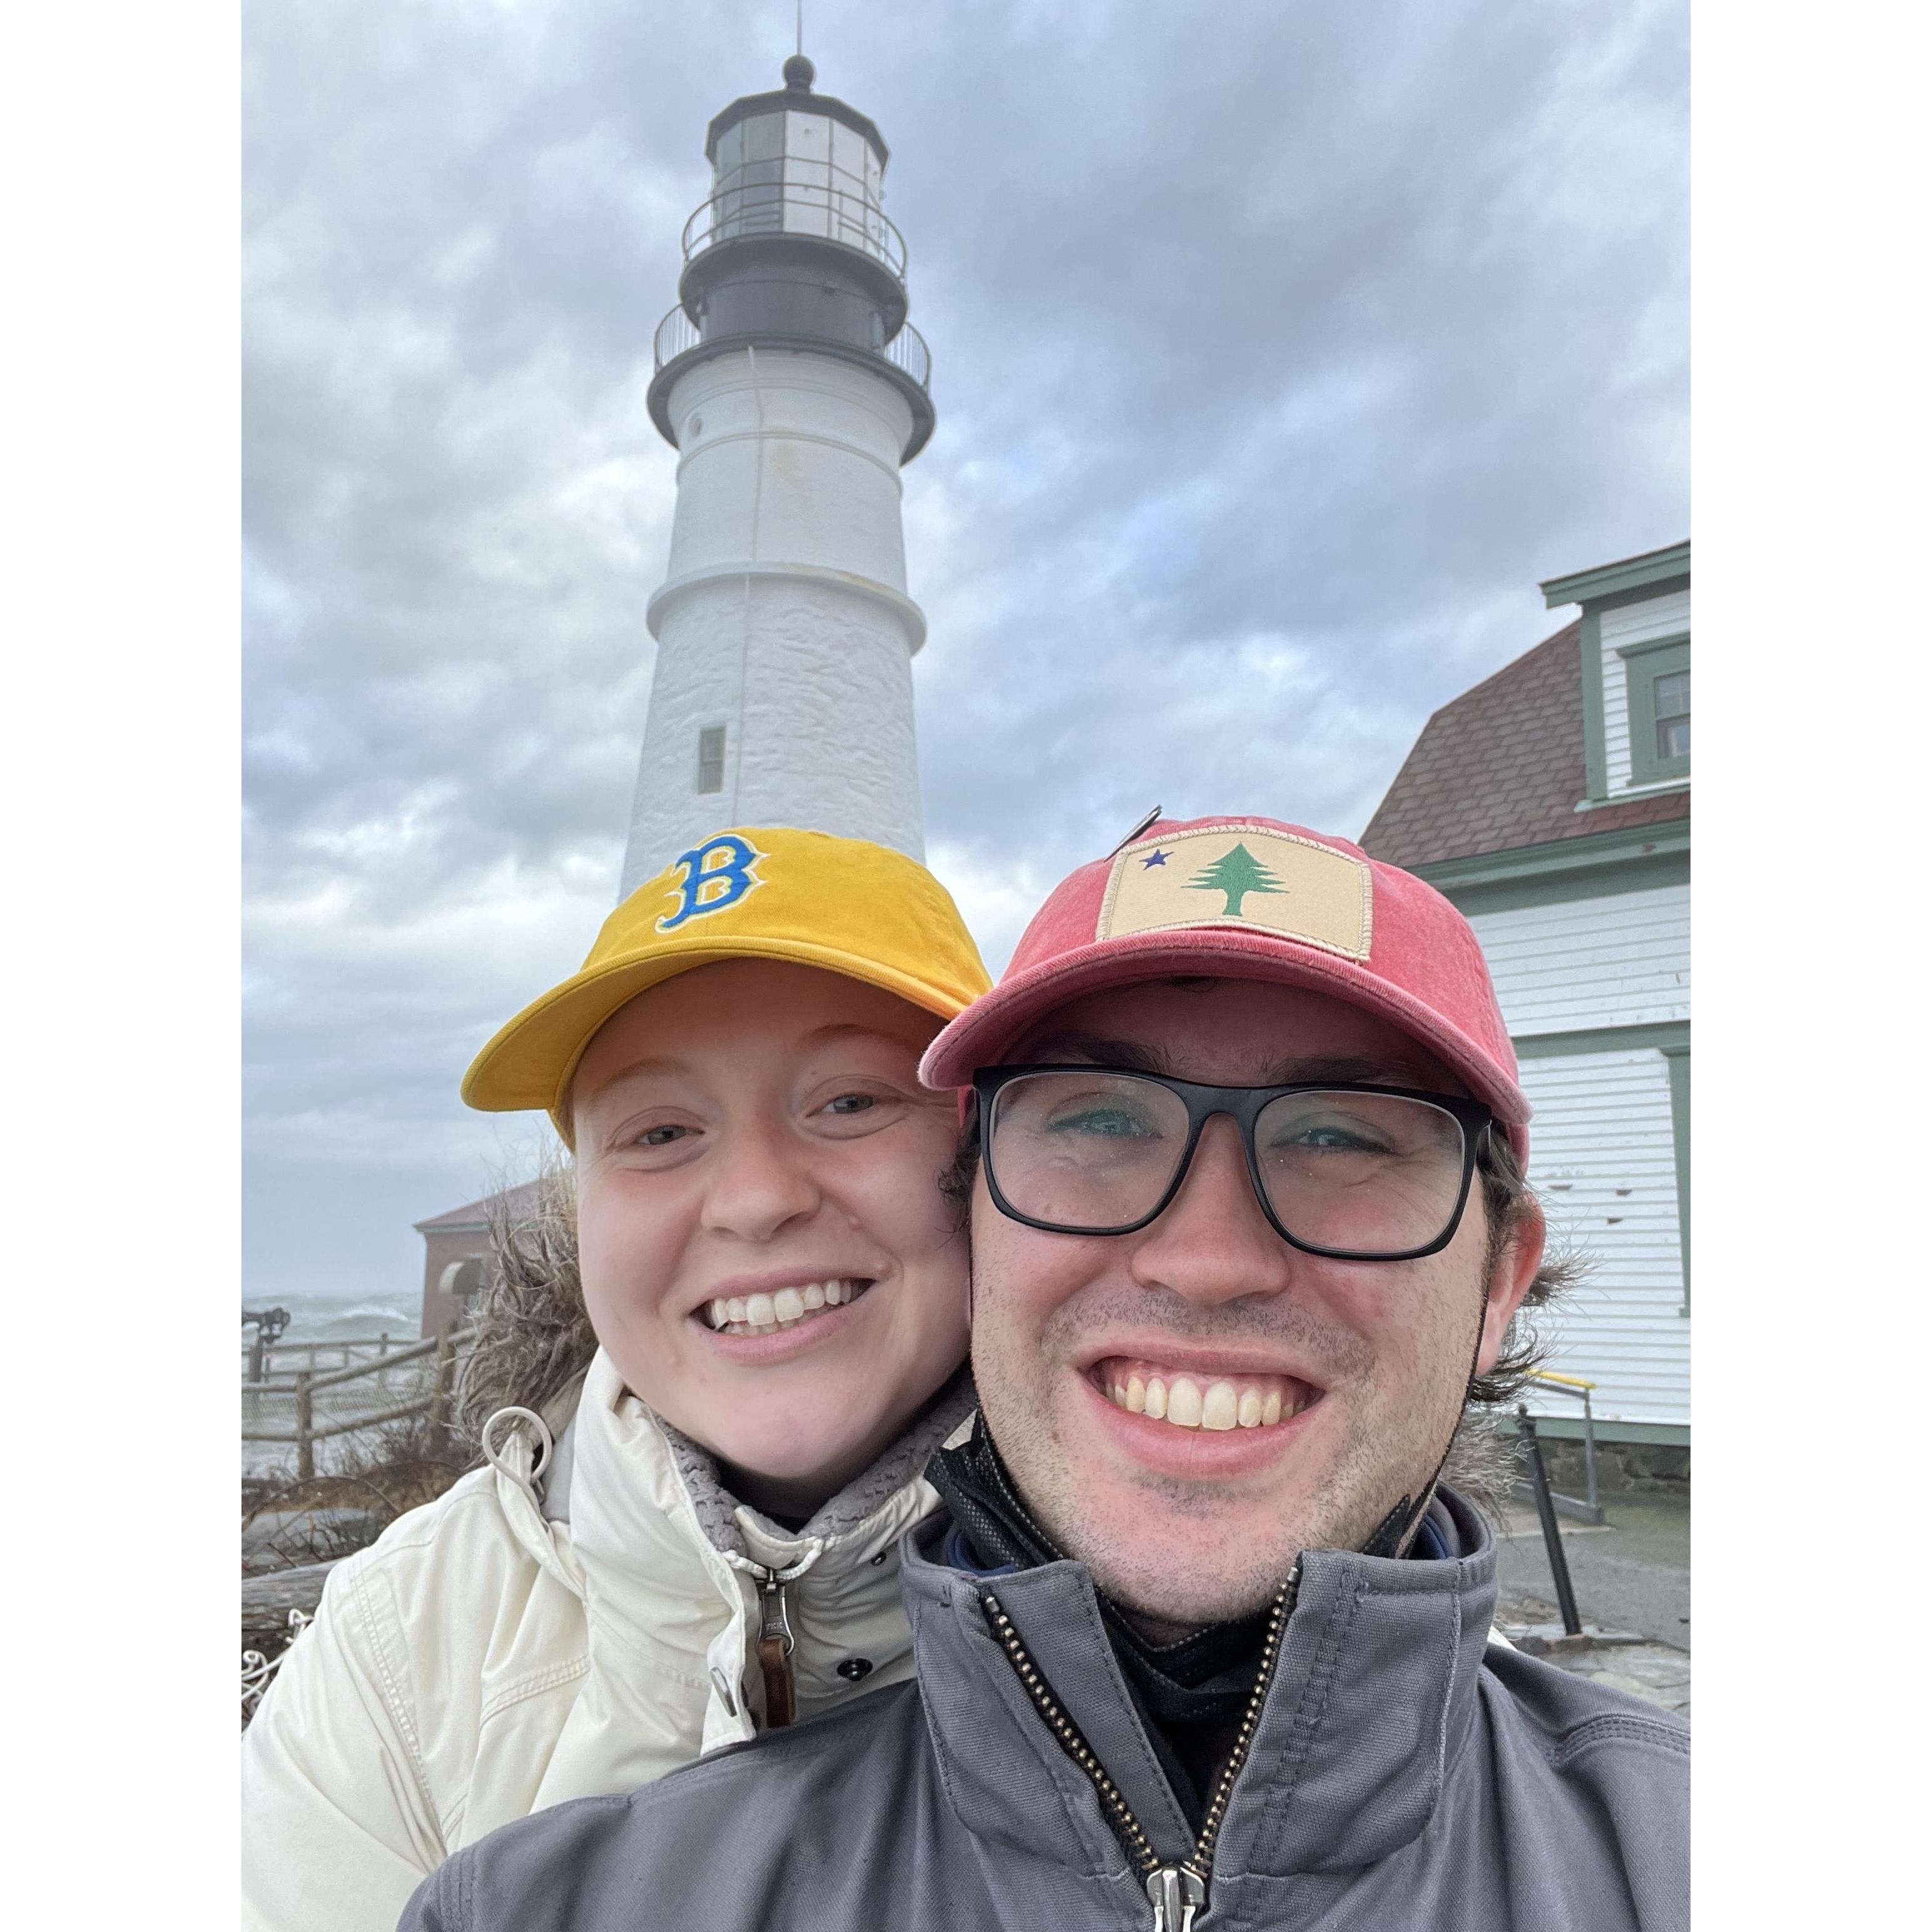 A fun weekend in Portland, Maine - this picture at the famous "Head Light" in January 2022